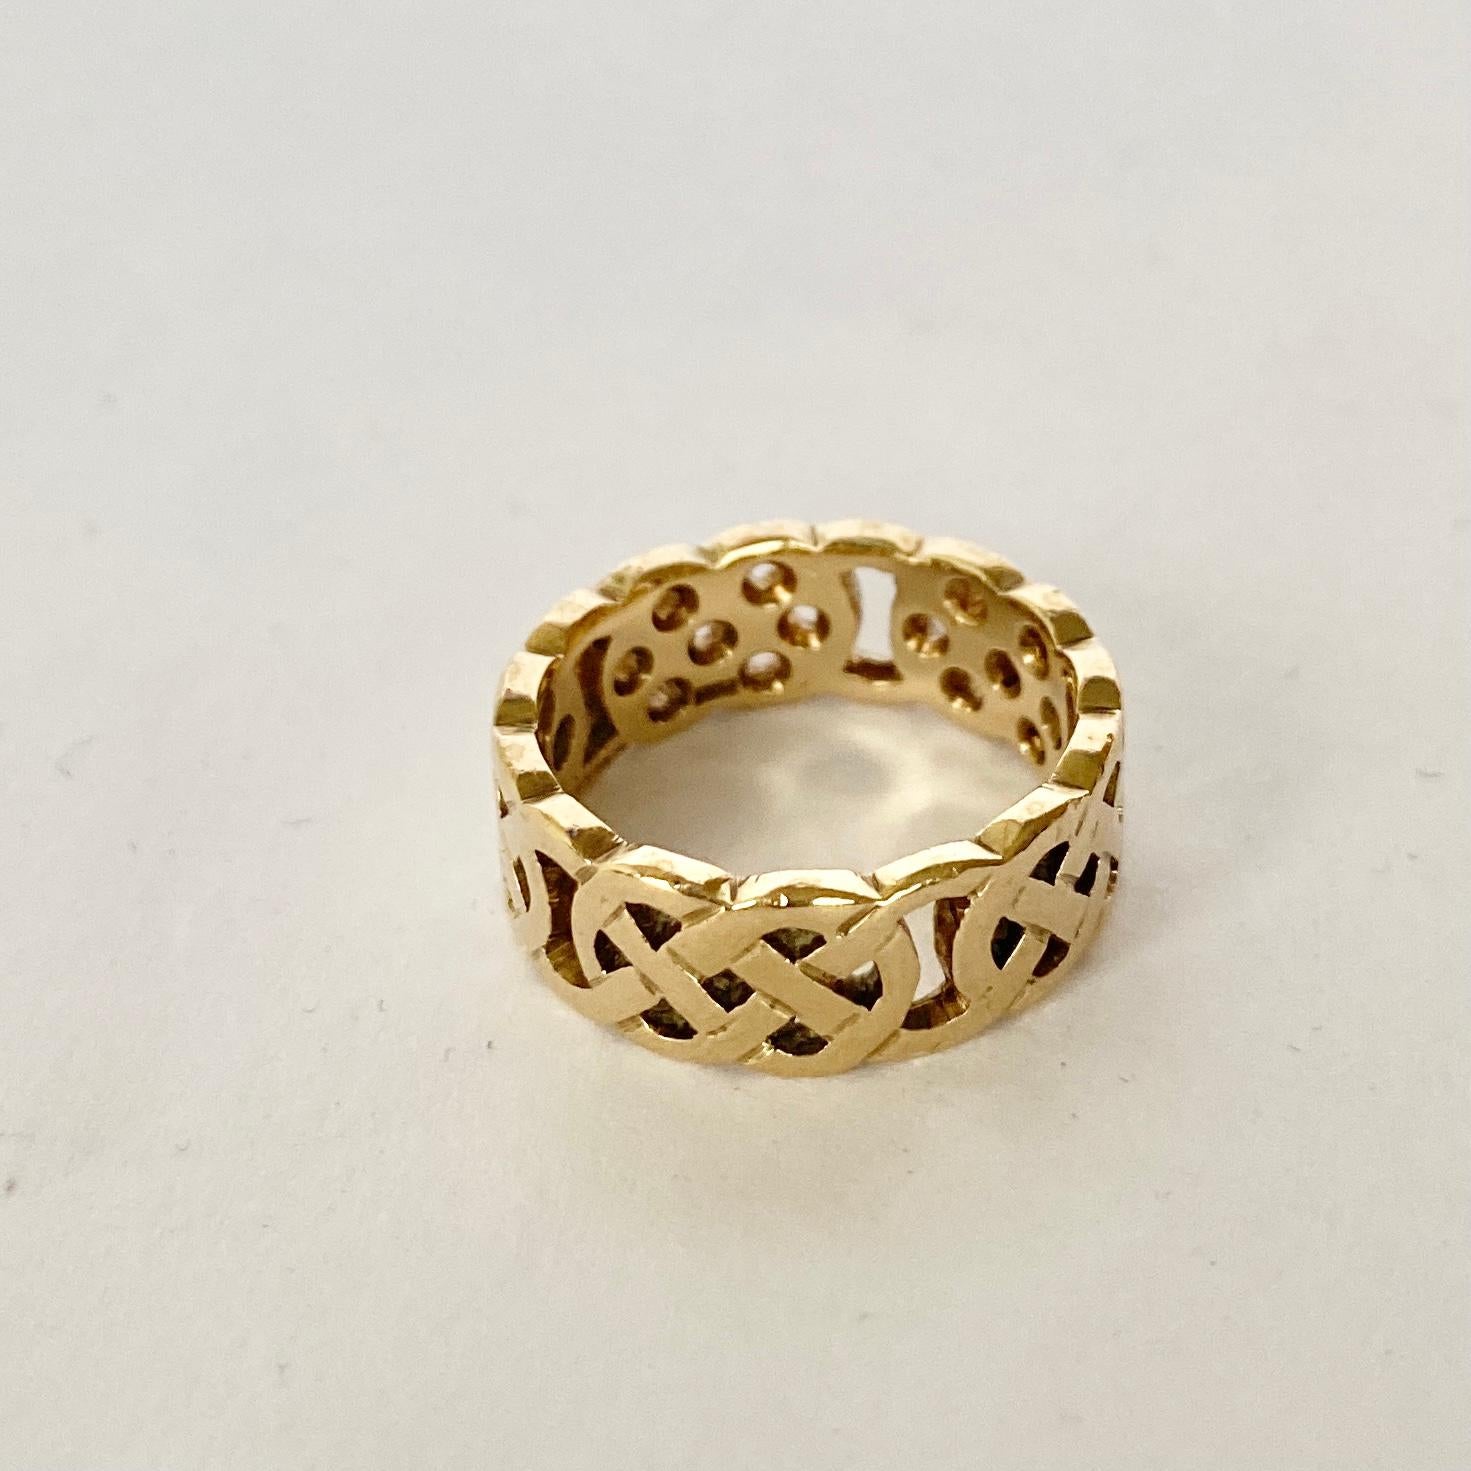 This band has a Celtic style to it and is modelled in 9carat gold. Fully hallmarked 1956 London.

Ring Size: I 1/2 or 4 1/2 
Band Width: 7mm

Weight: 4g